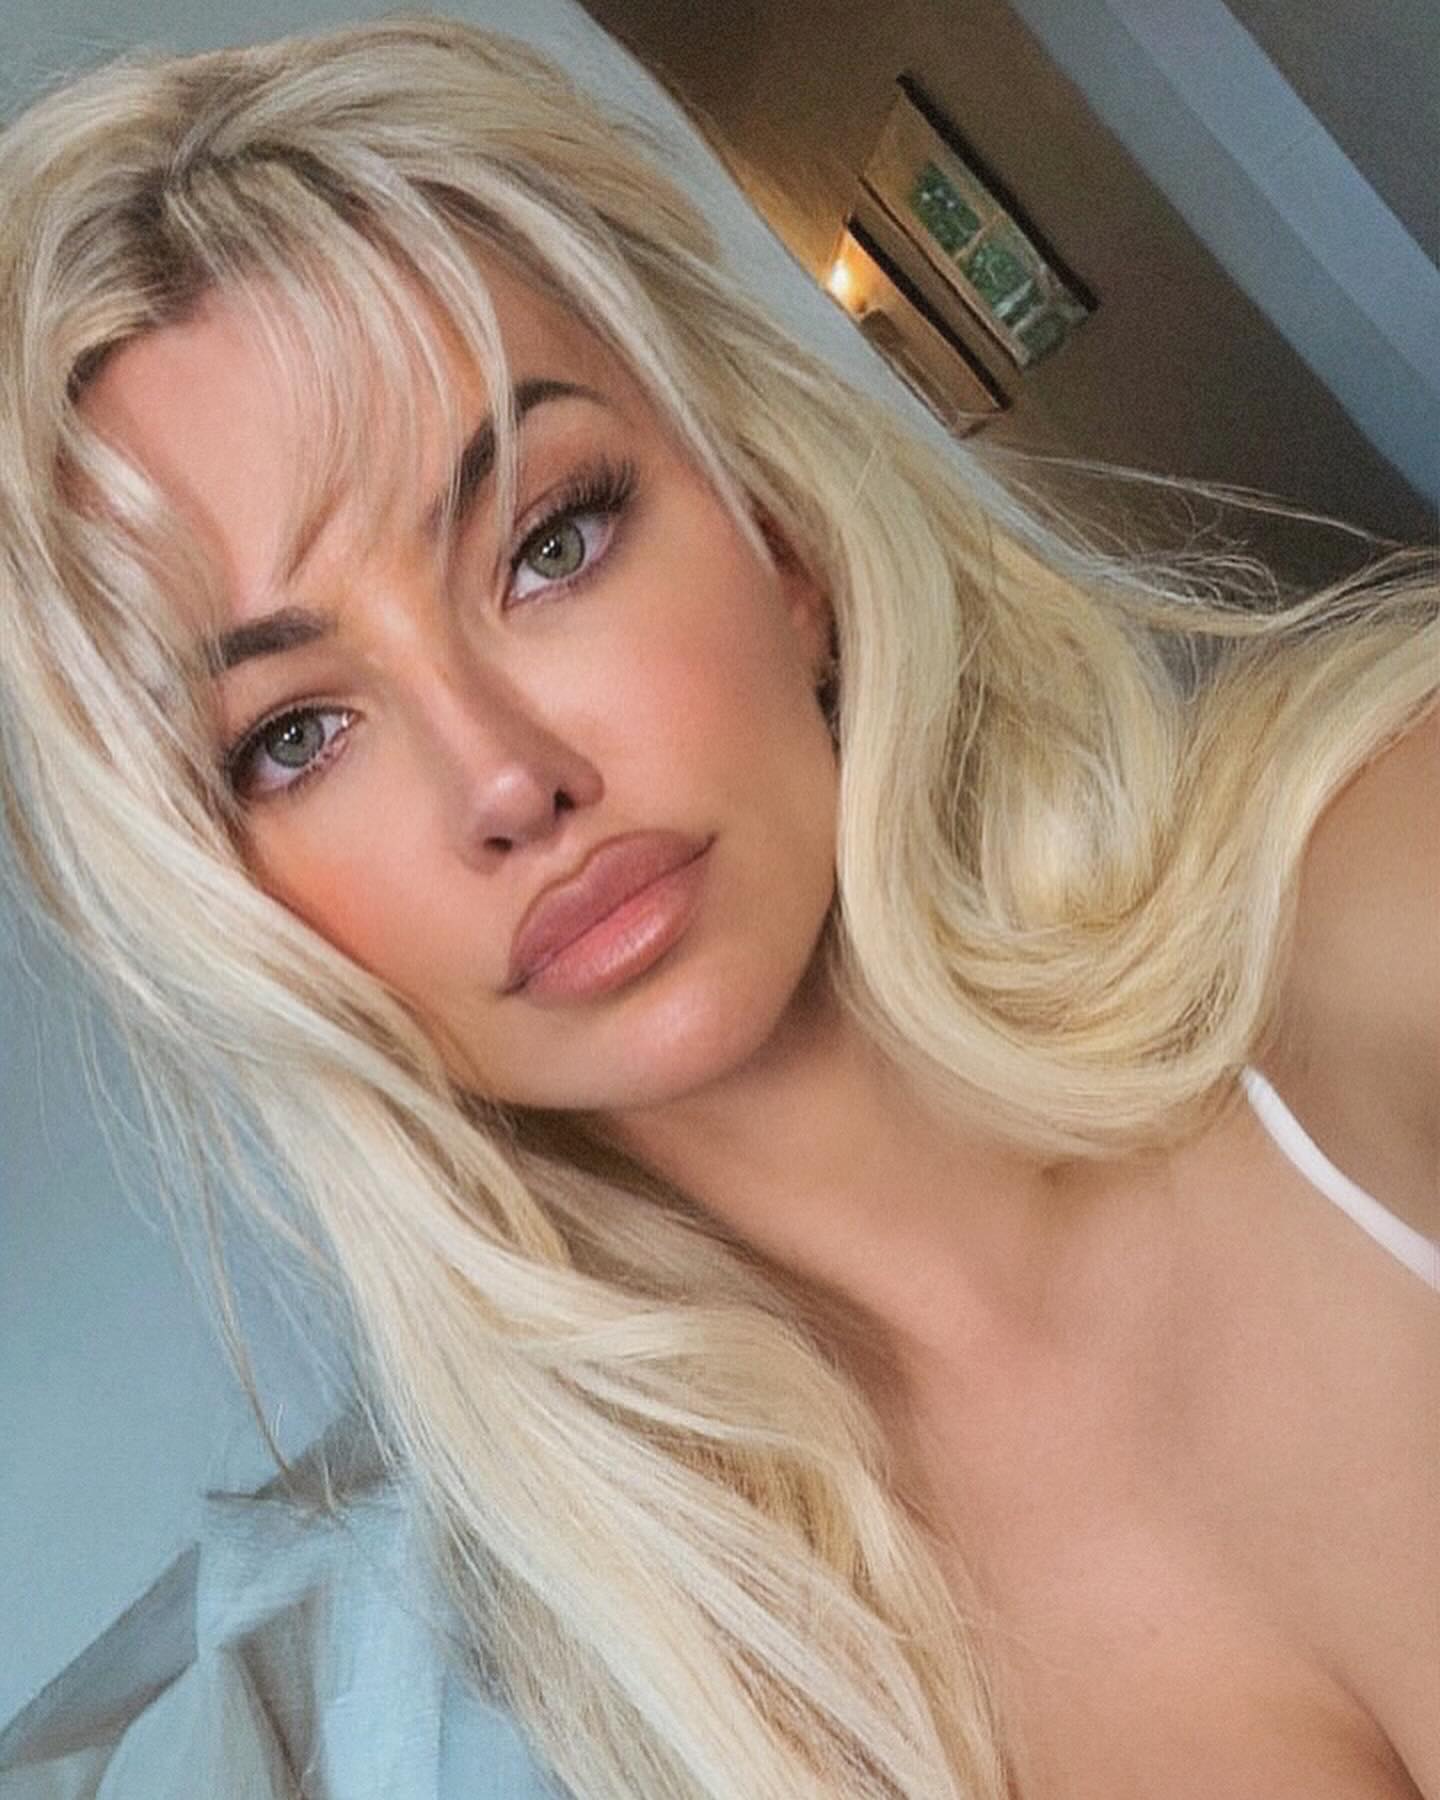 rainy days and fluffy blonde hair 🌧️ gifted by @savagestrandss